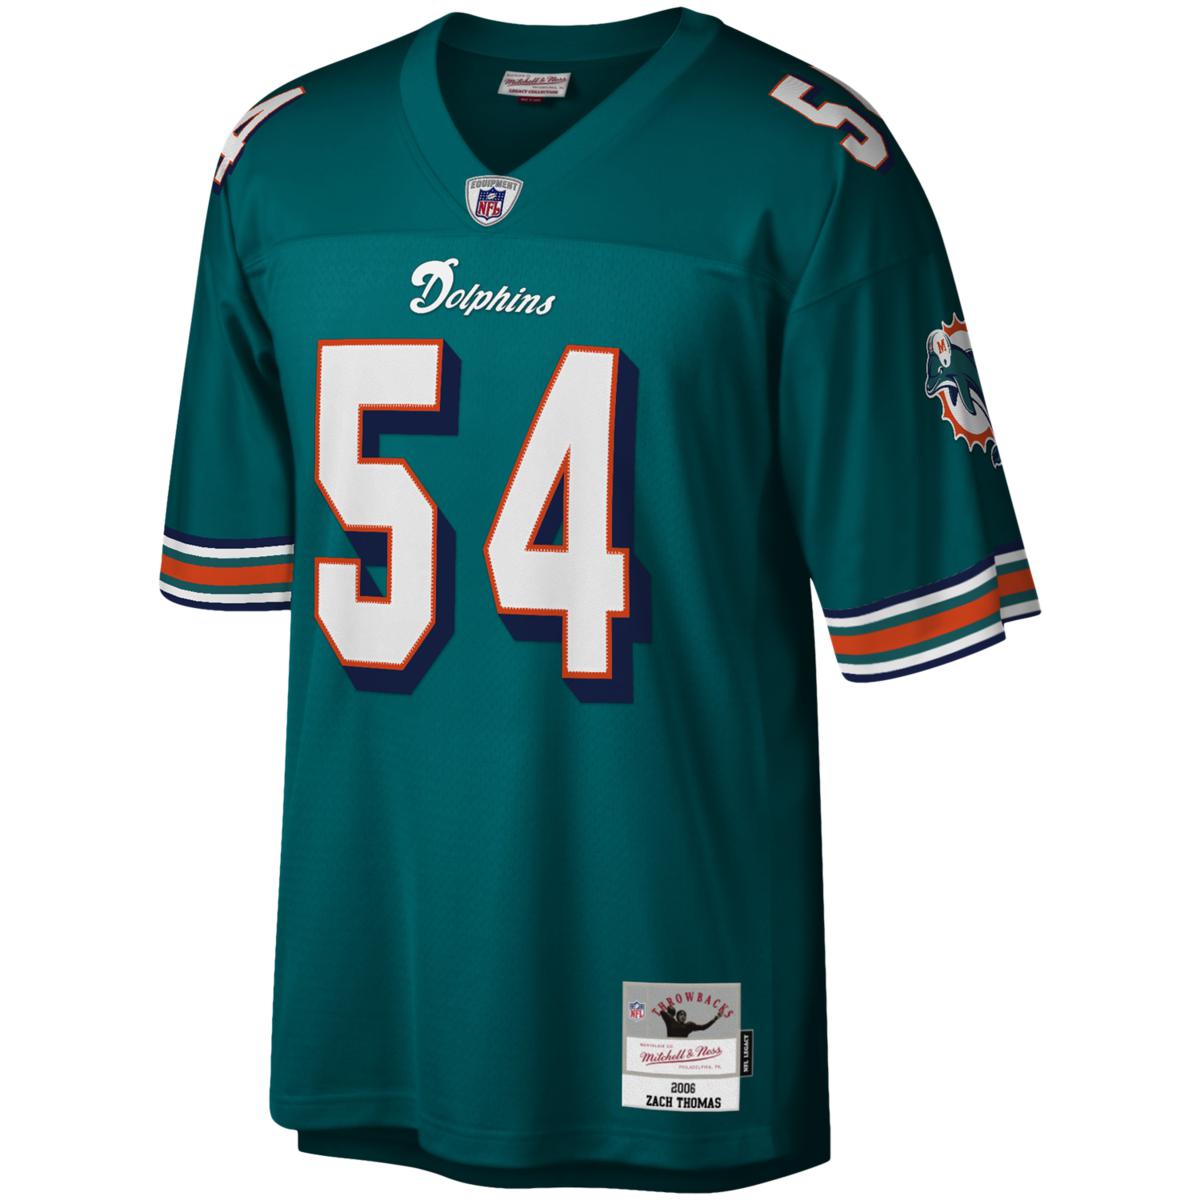 Officially Licensed NFL Miami Dolphins Aqua Legacy Jersey